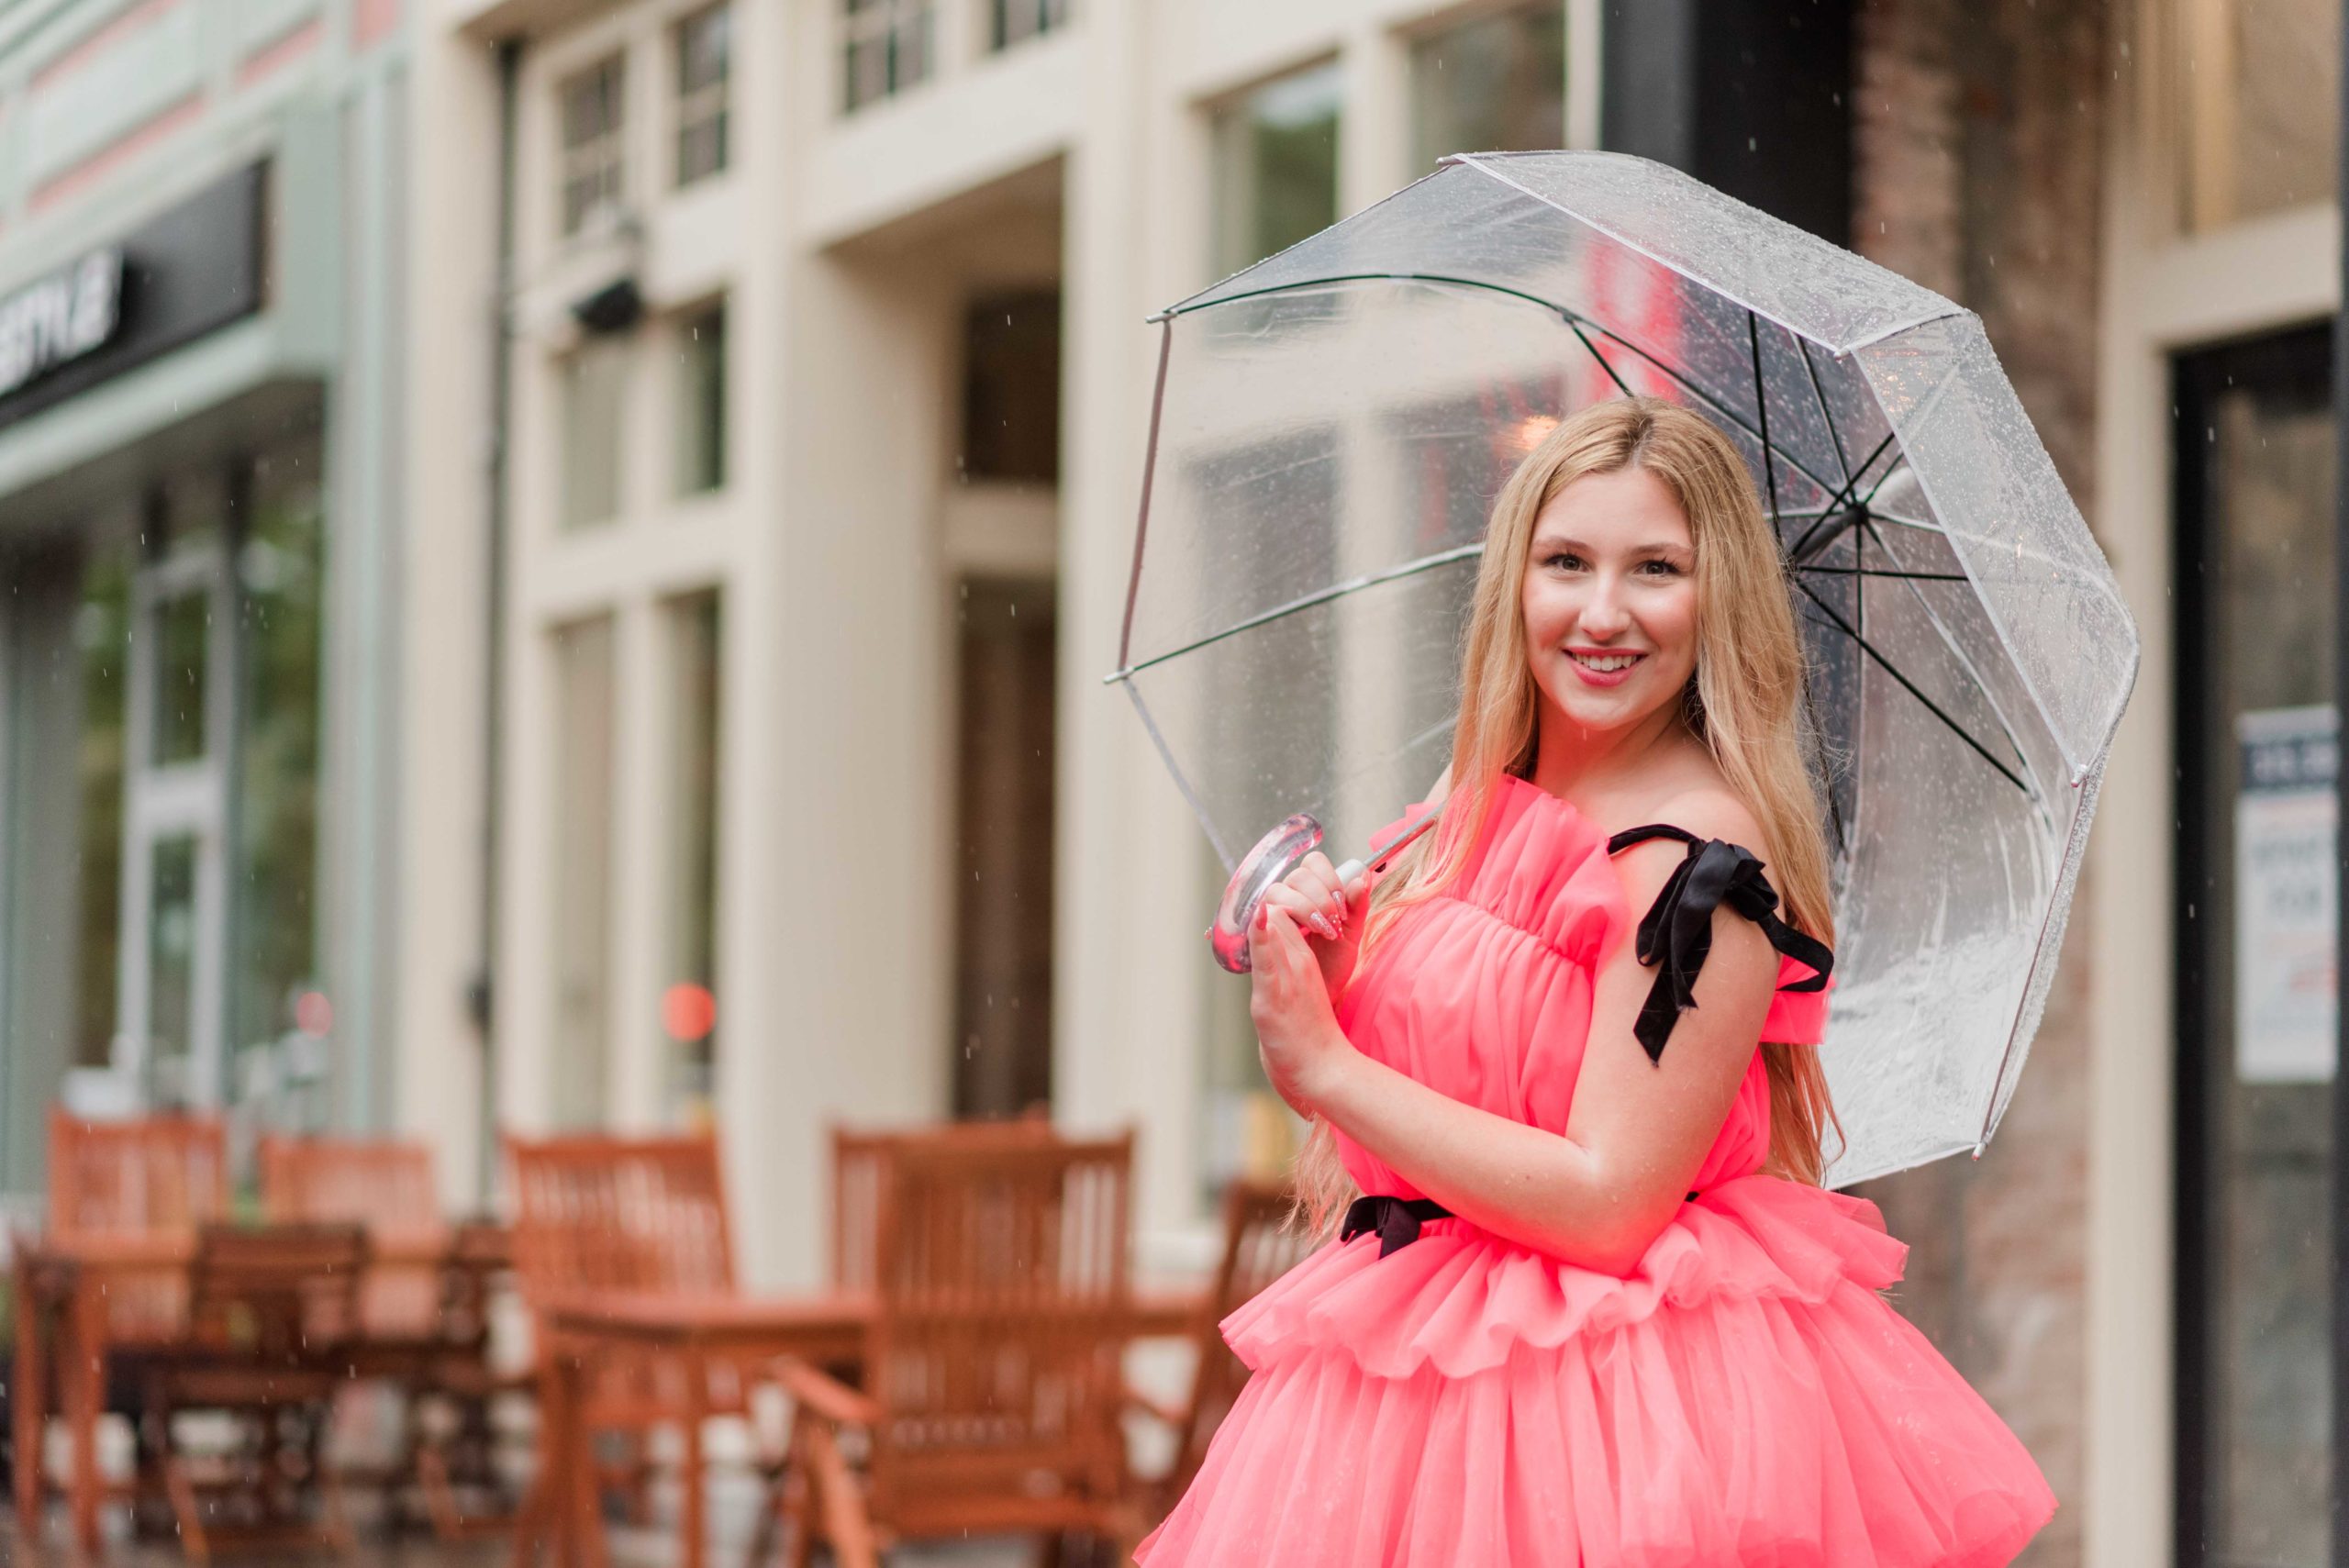 Syracuse senior portraits of girl in pink dress and umbrella in downtown Syracuse